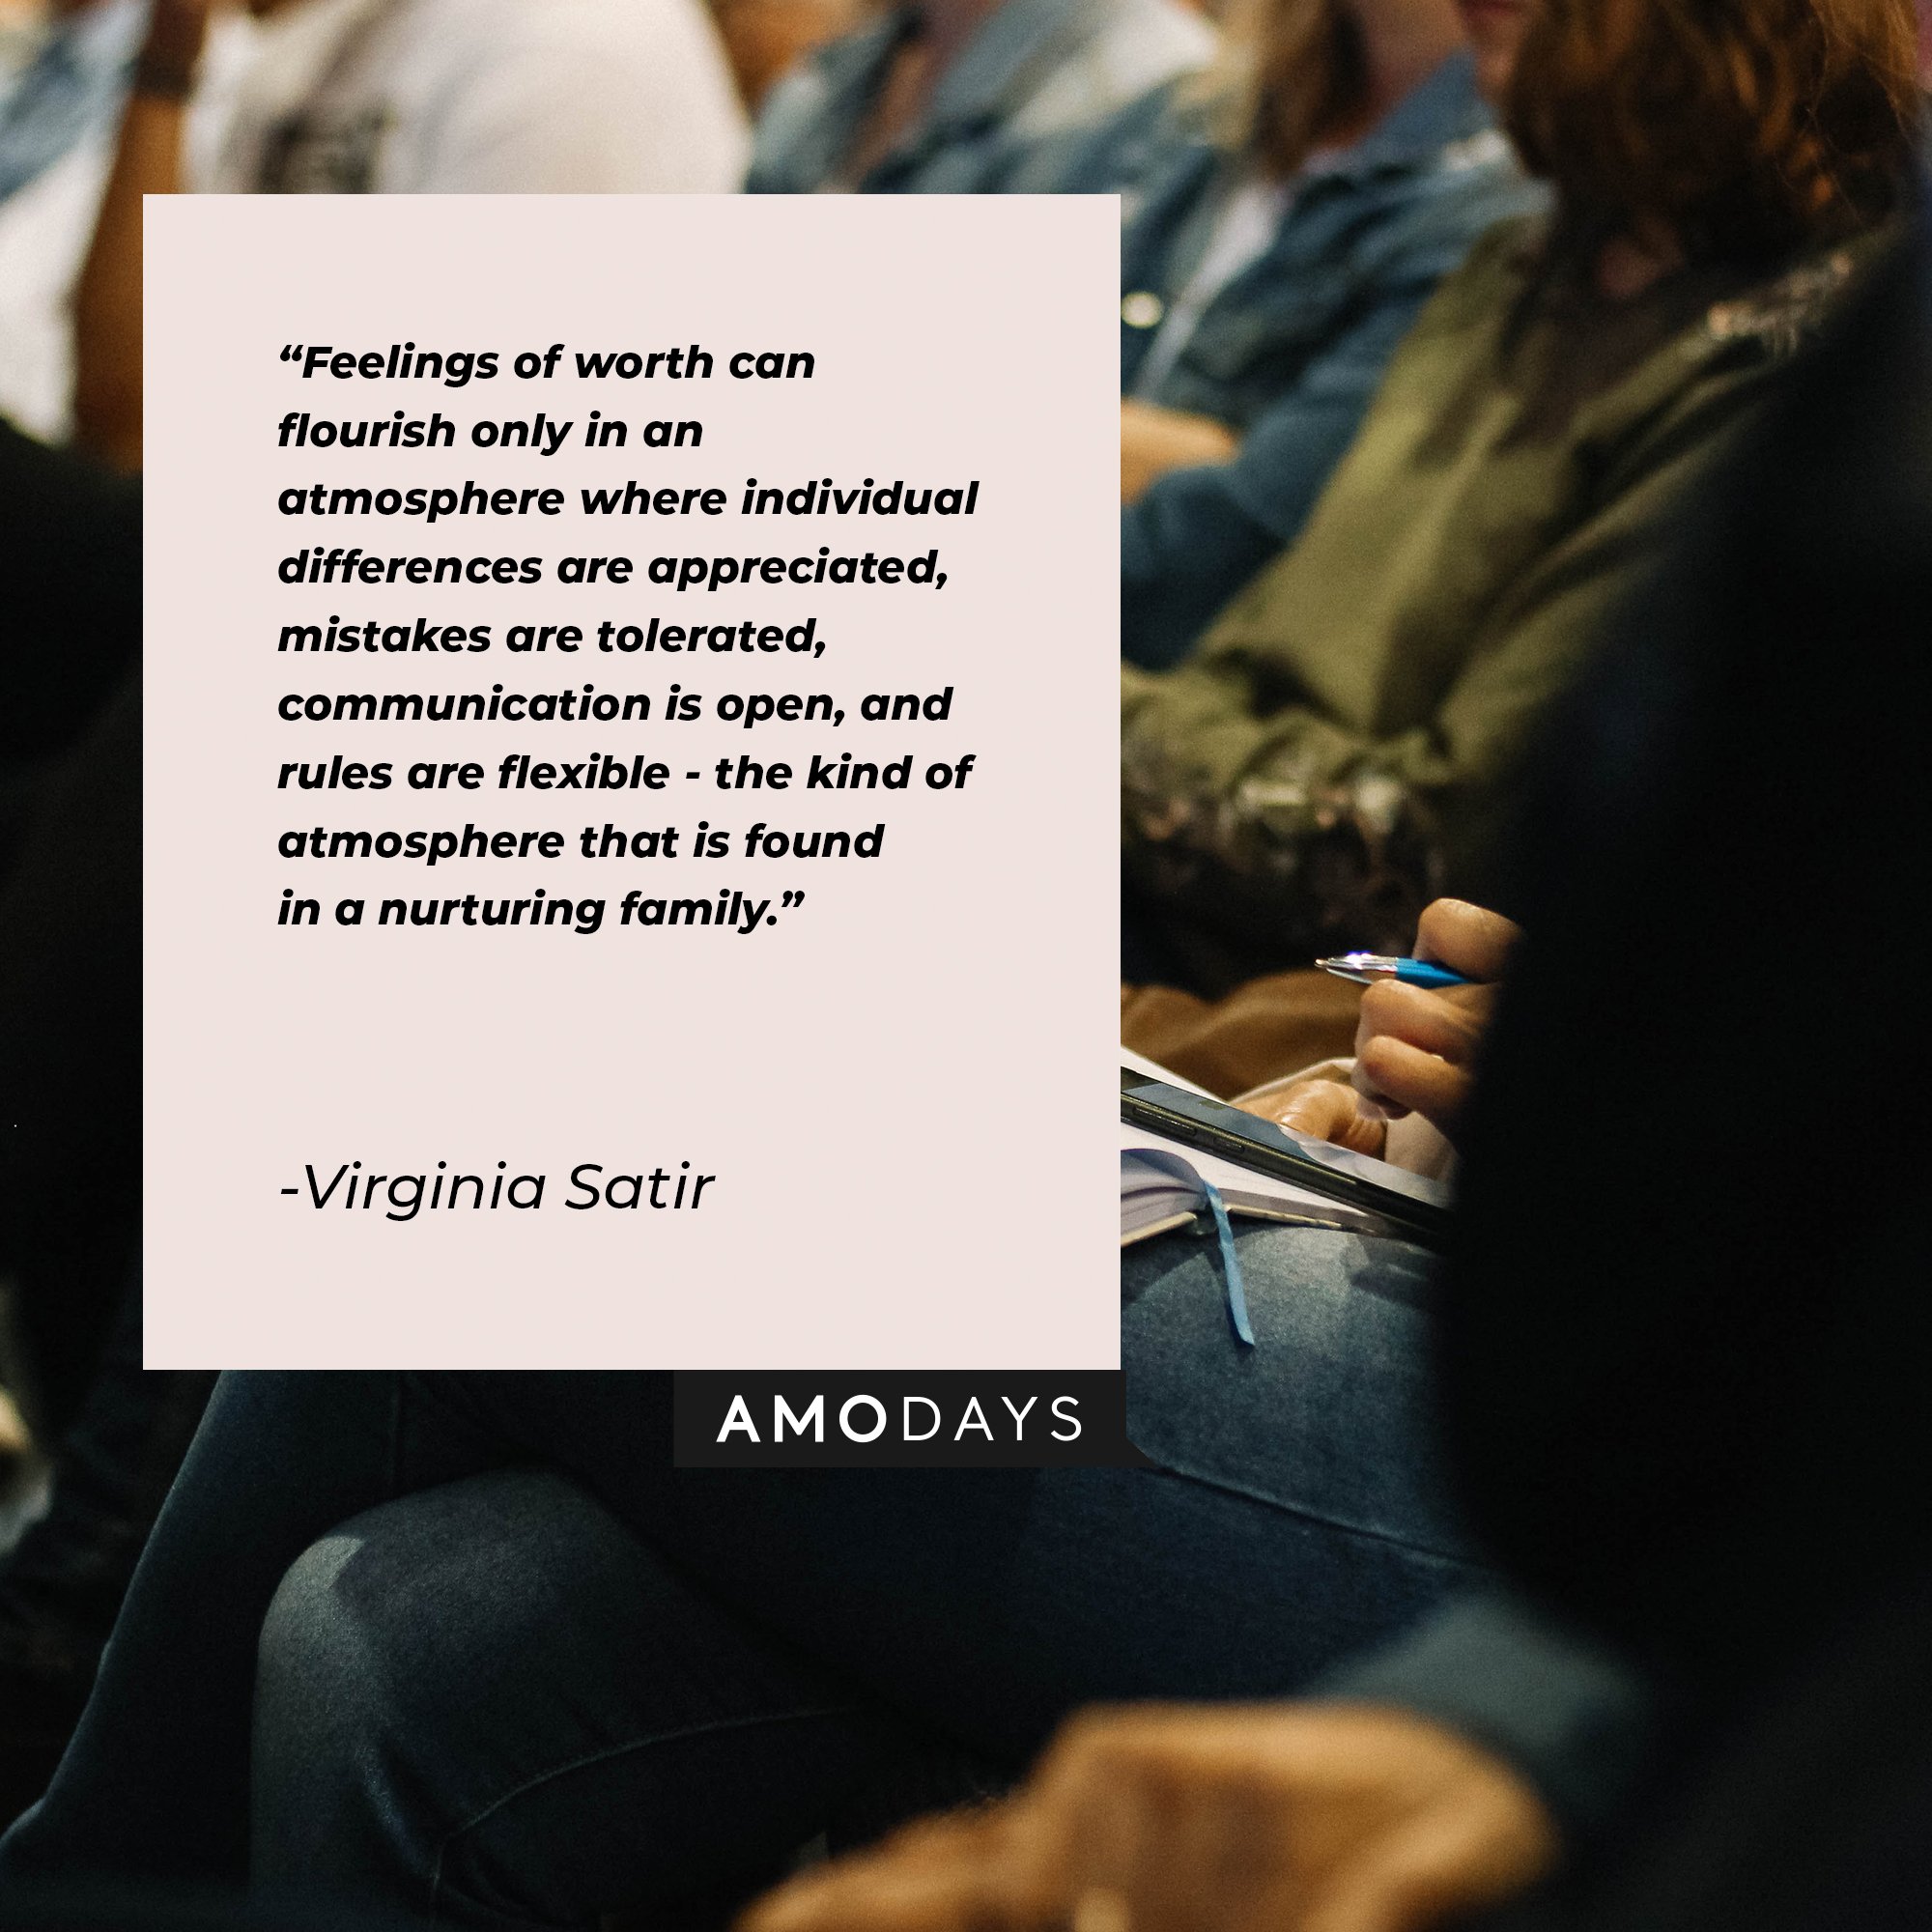 Virginia Satir's quote: “Feelings of worth can flourish only in an atmosphere where individual differences are appreciated, mistakes are tolerated, communication is open, and rules are flexible - the kind of atmosphere that is found in a nurturing family.” | Image:AmoDays